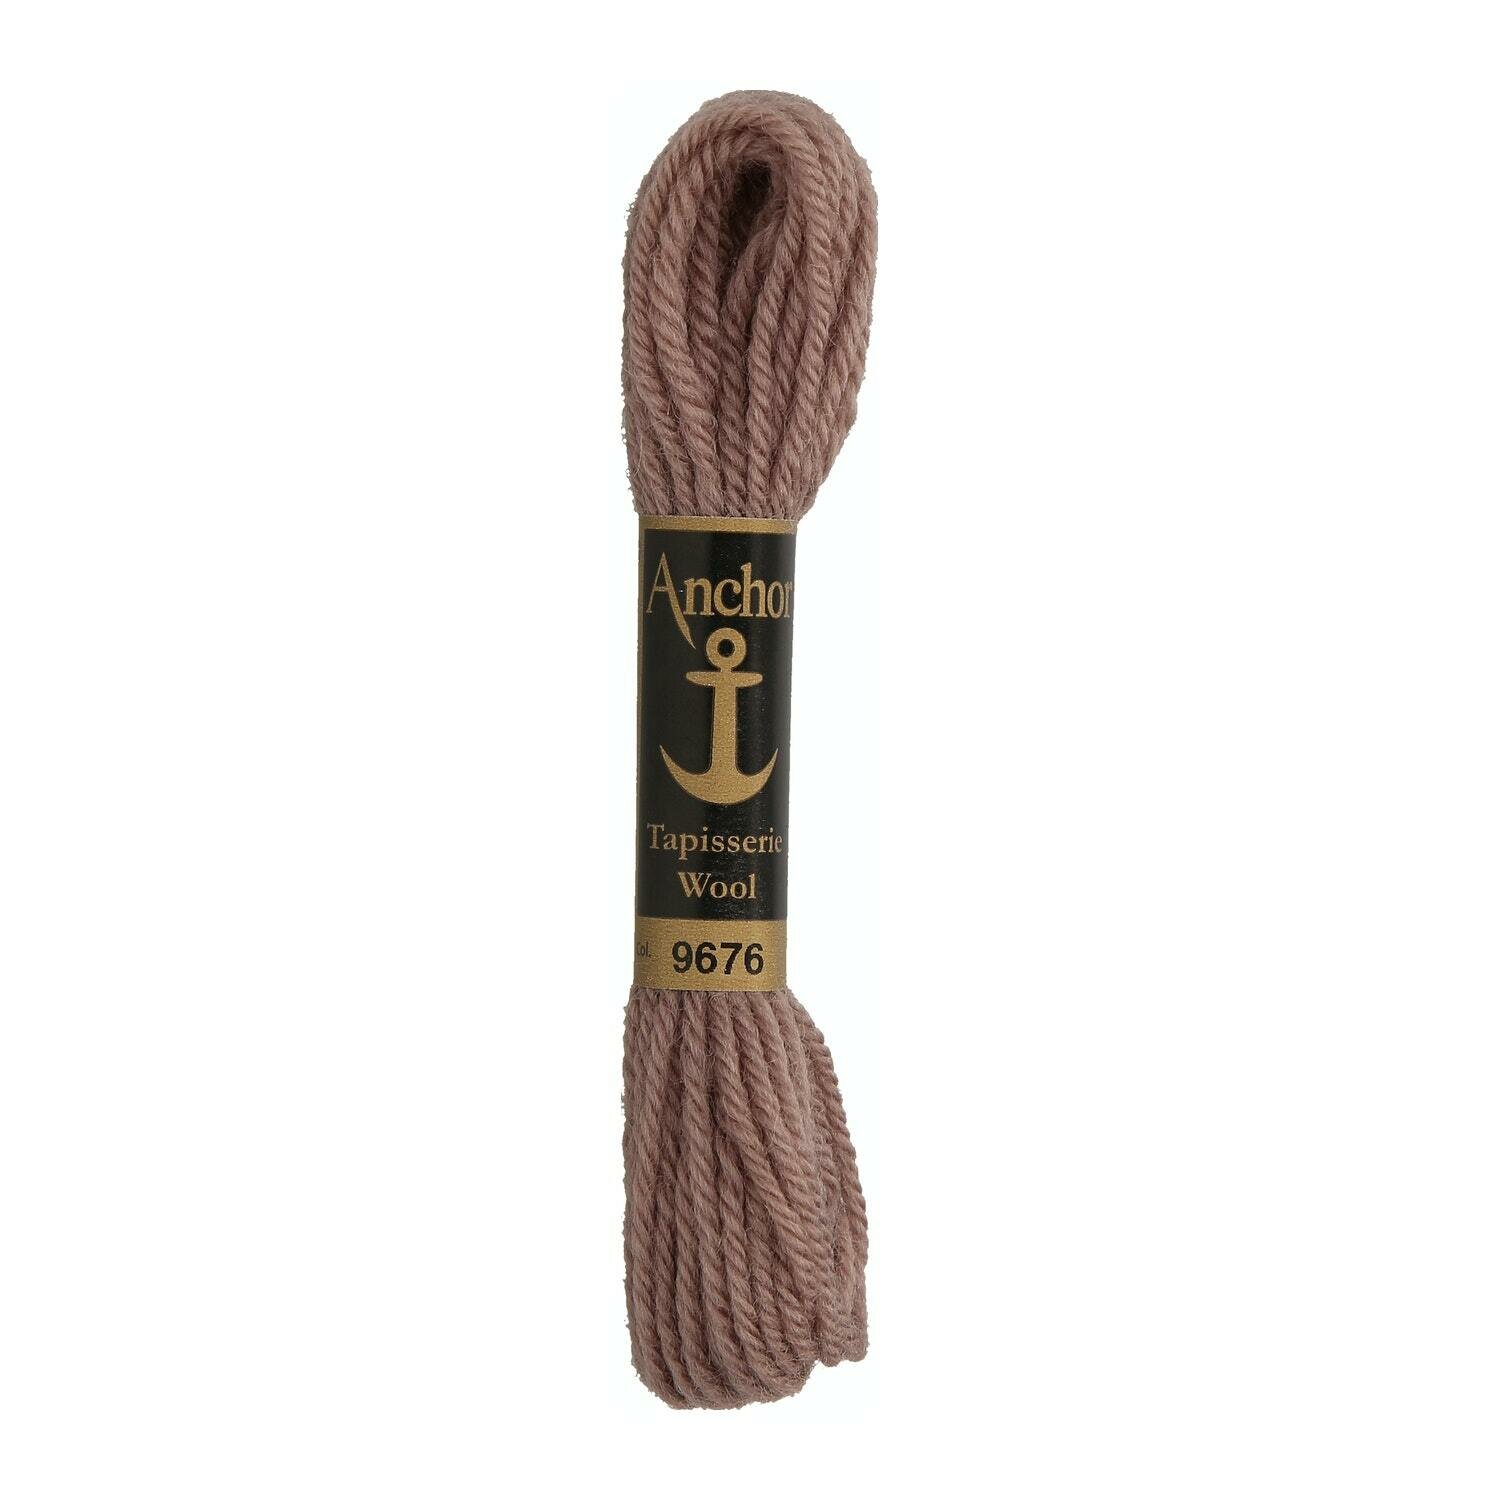 Anchor Tapisserie Wool # 09676